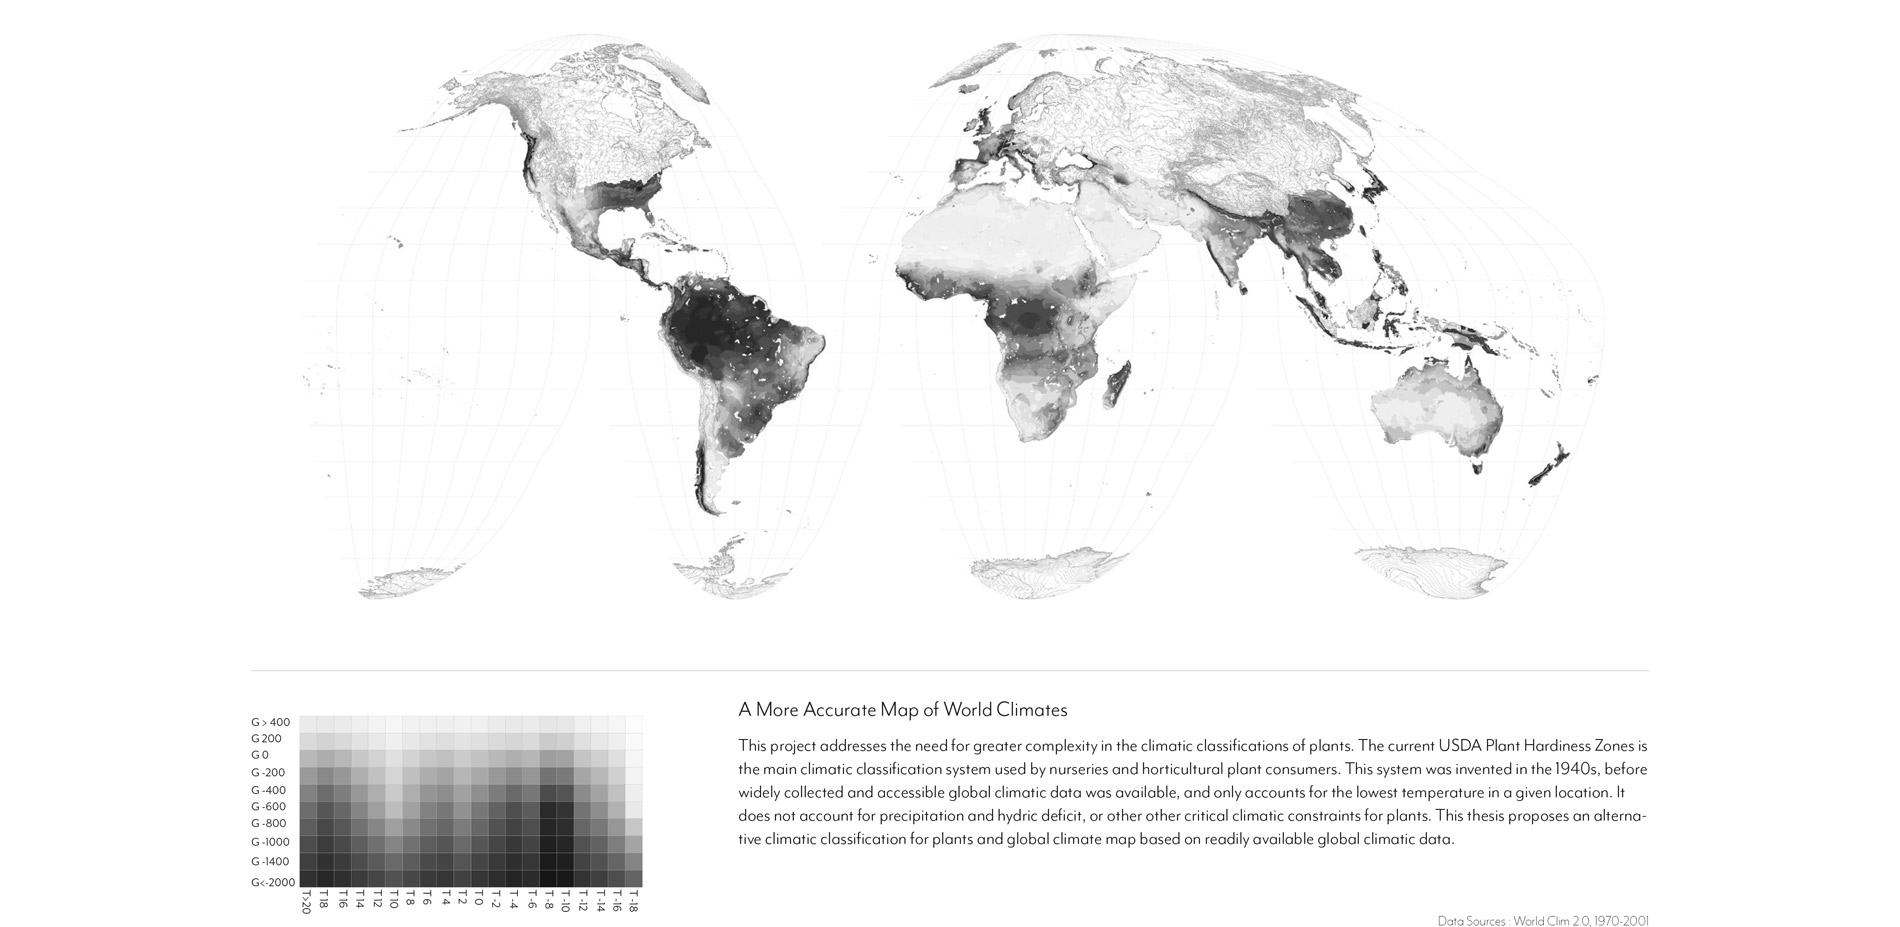 A More Accurate Map of Global Climates